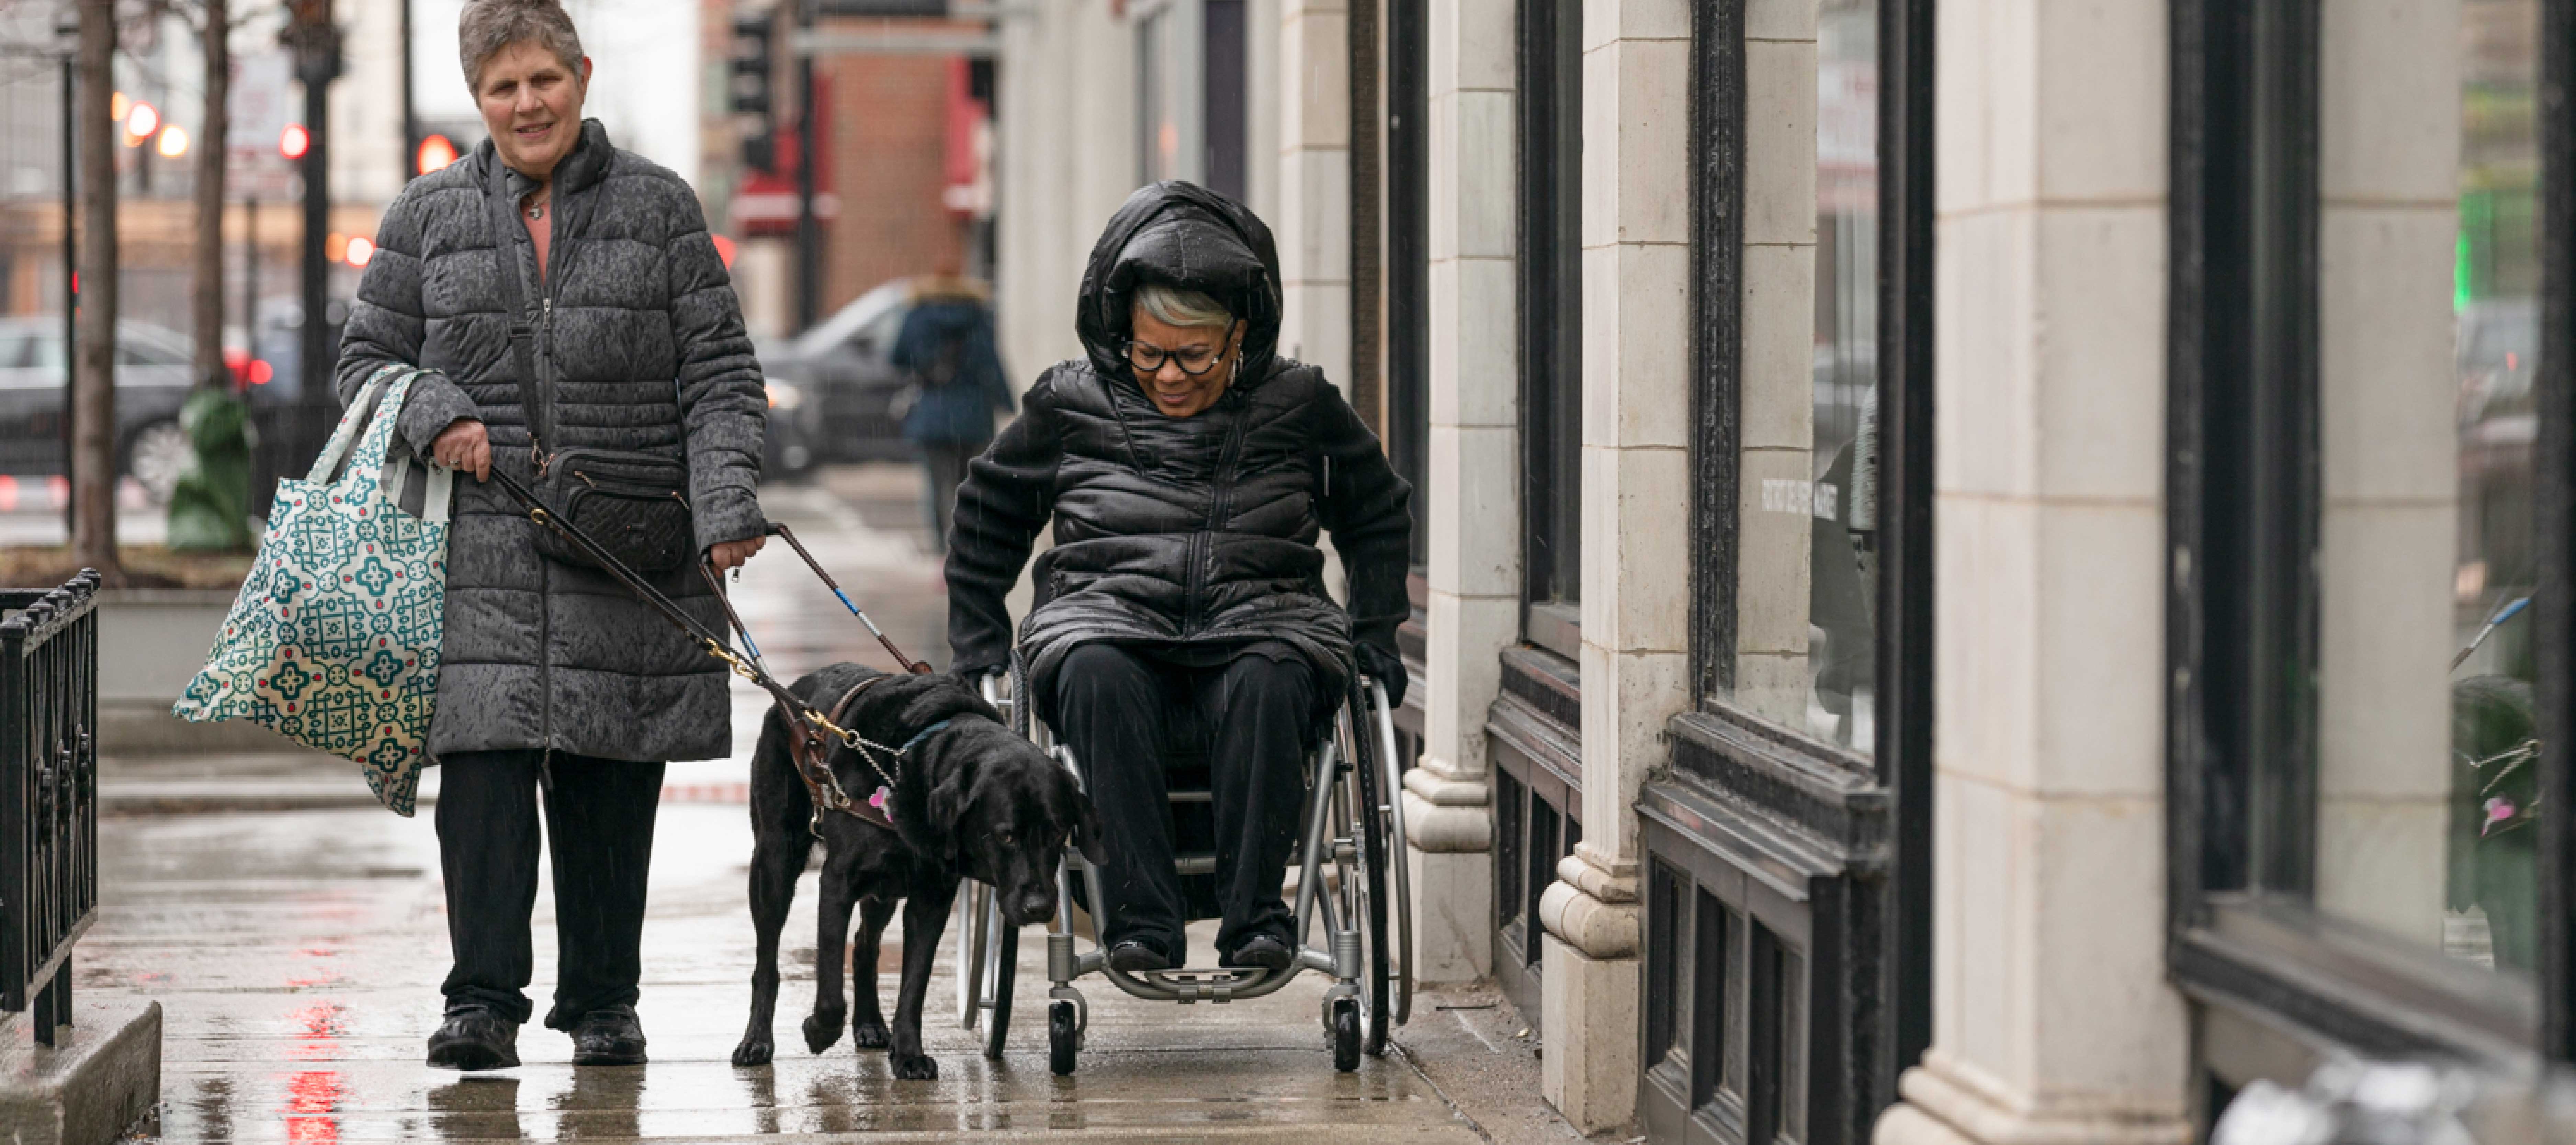 Woman with service dog and wheelchair user walking city street